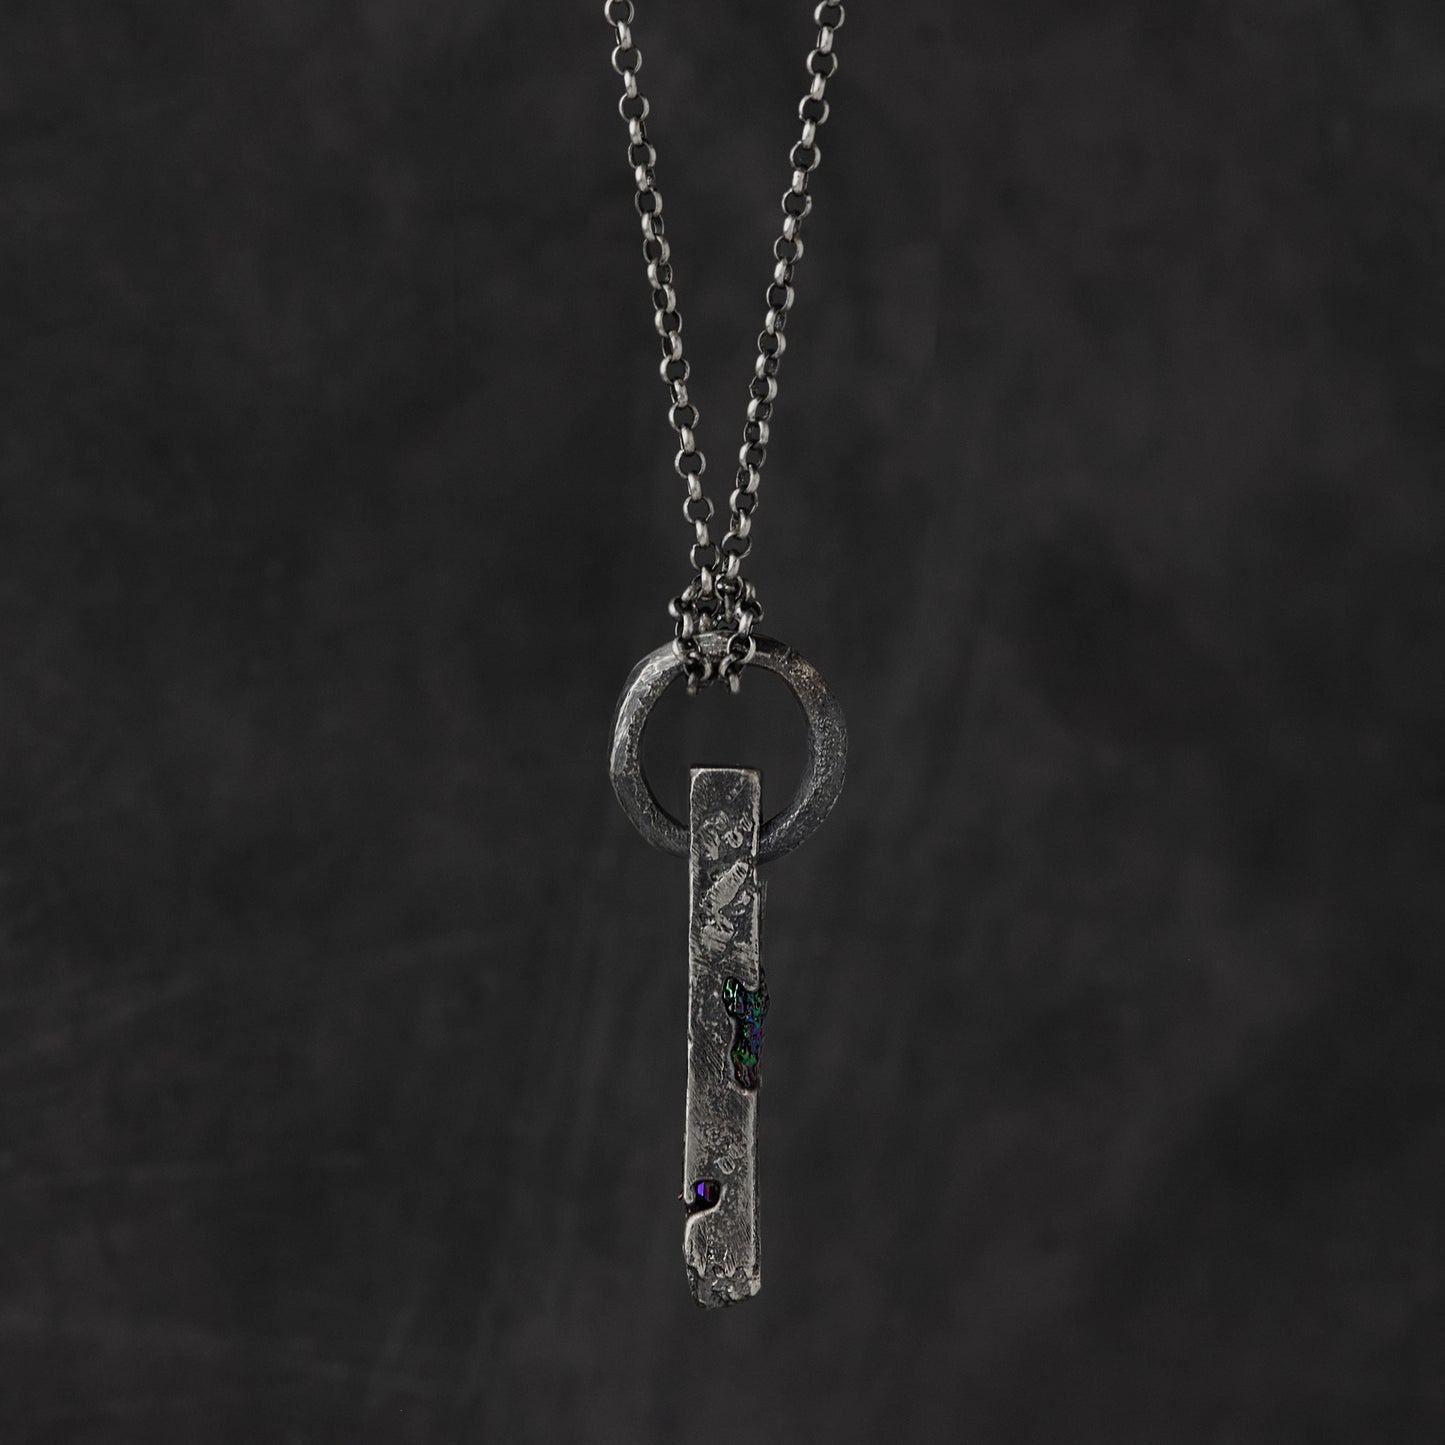 Dilmun - Oxidised Sterling Silver Ring And Monolith Necklace